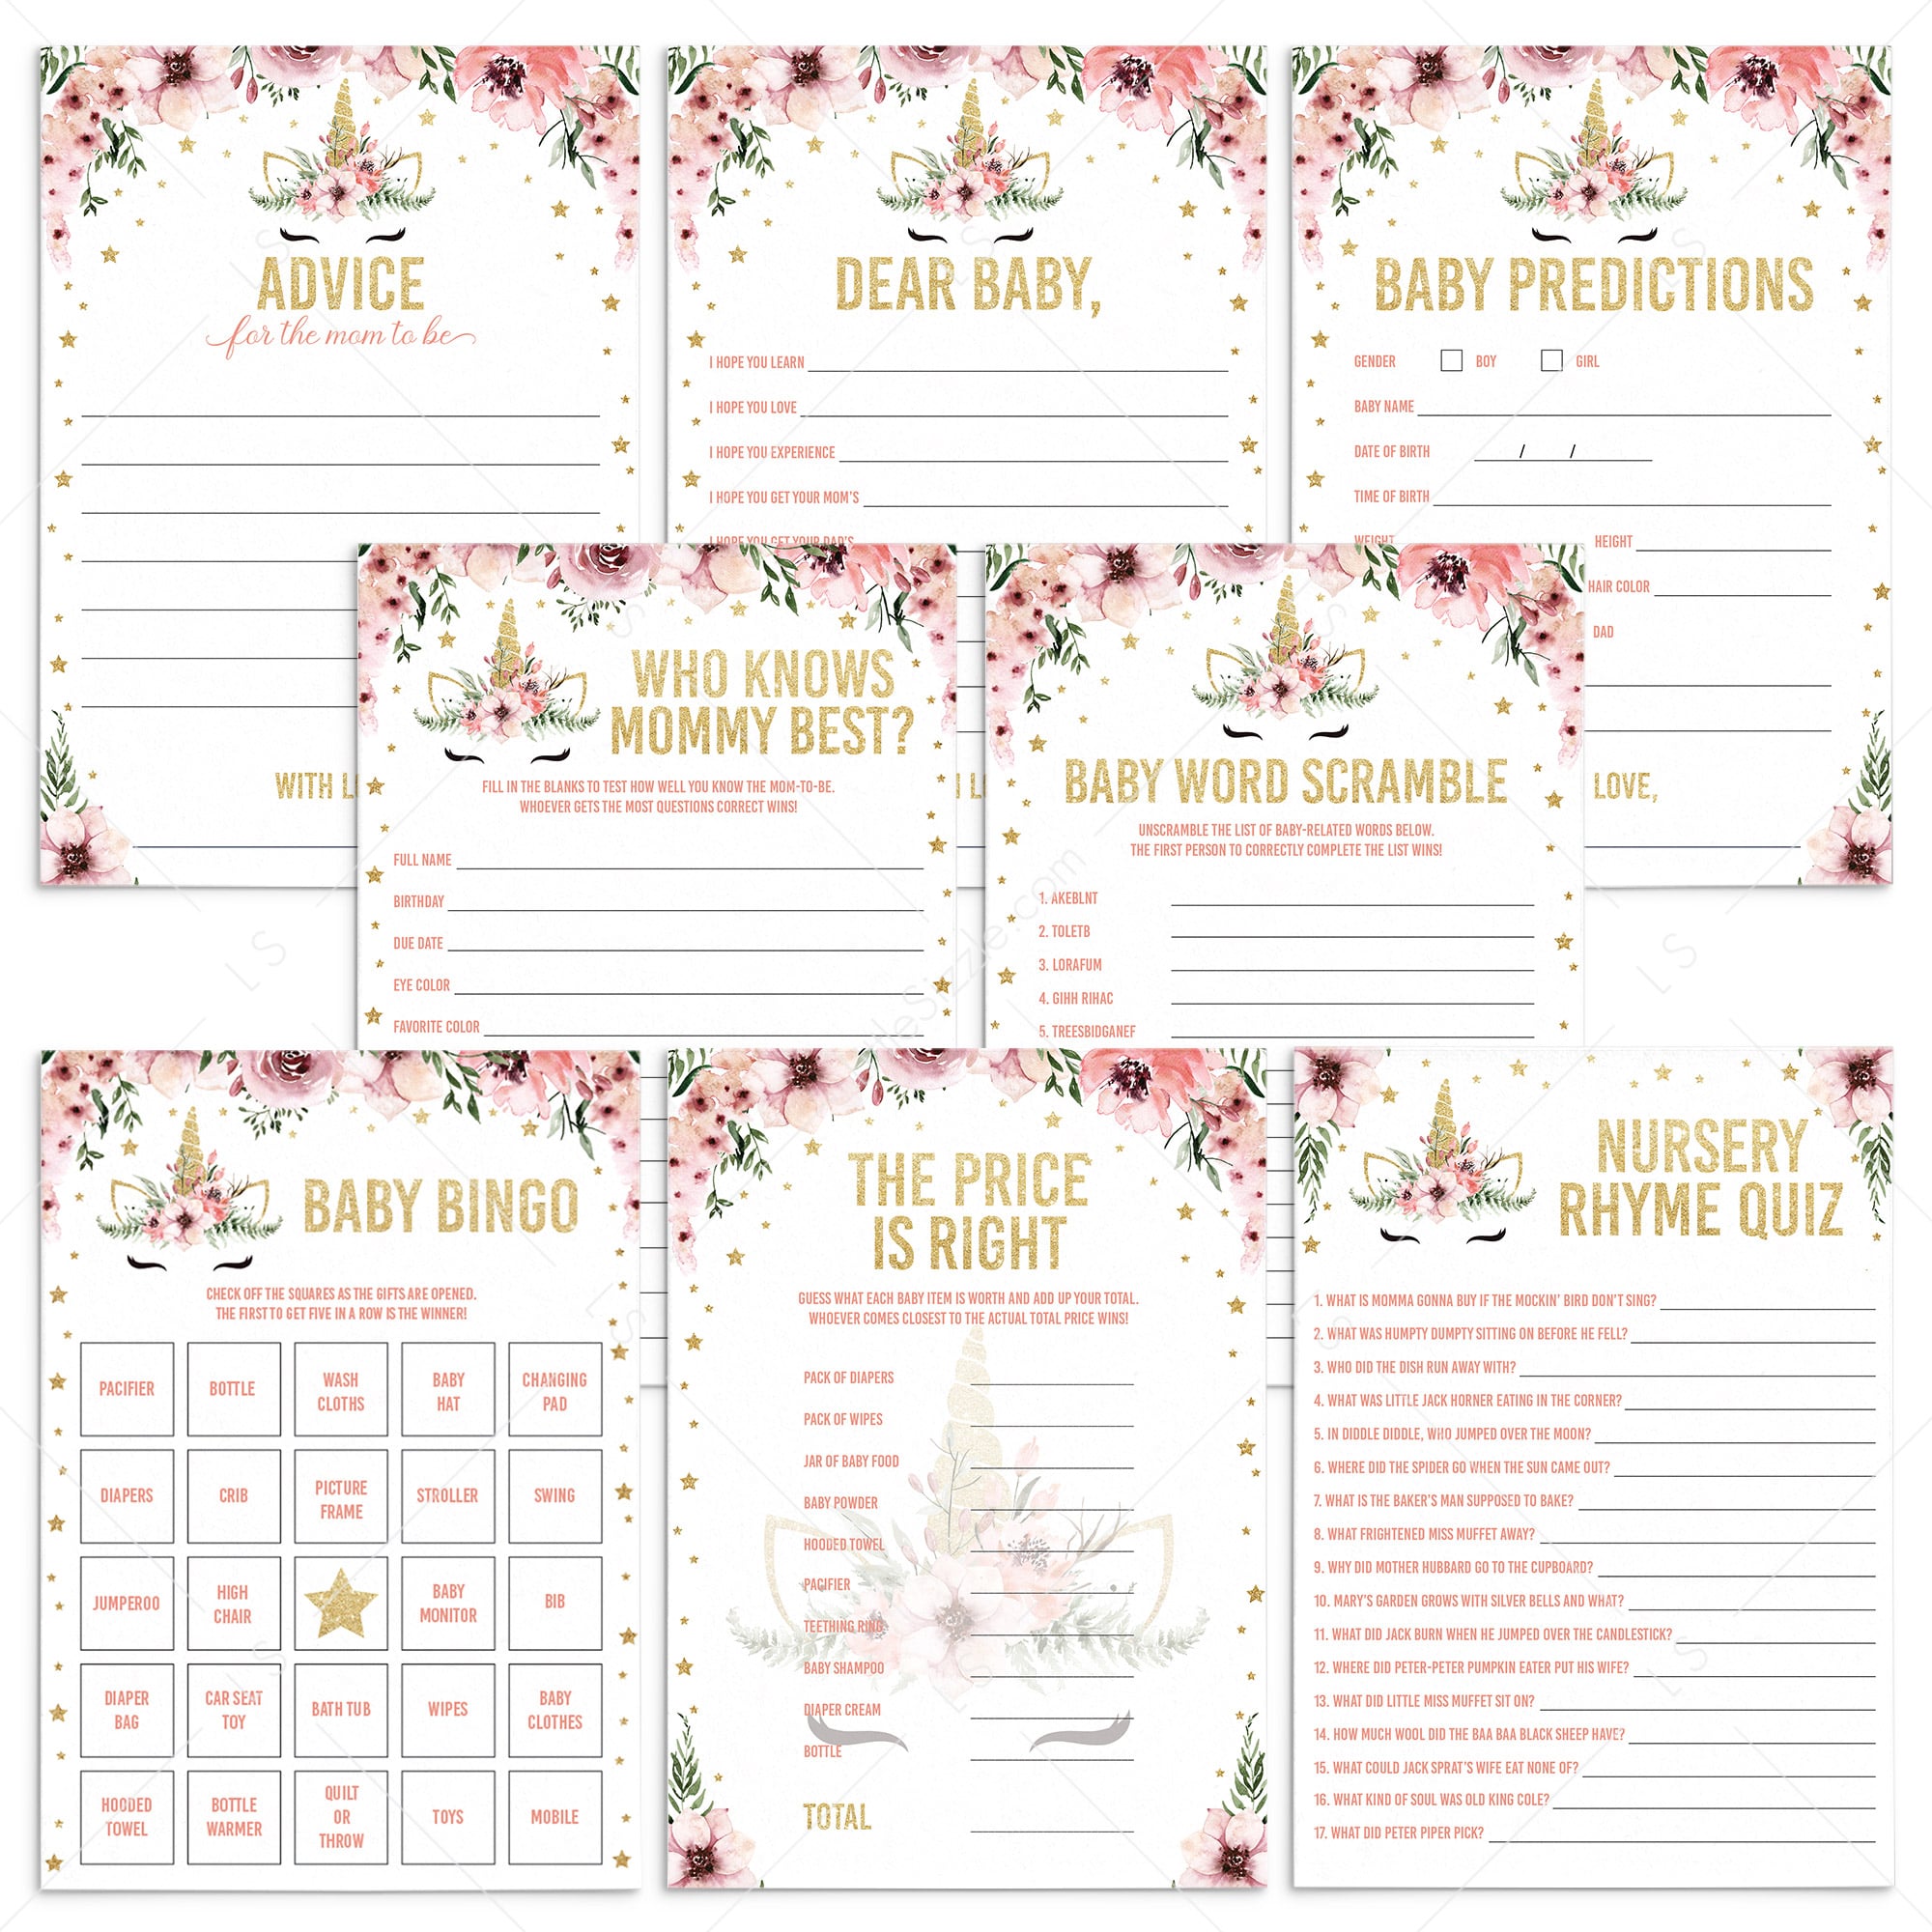 Huge baby shower games package printable unicorn themed by LittleSizzle